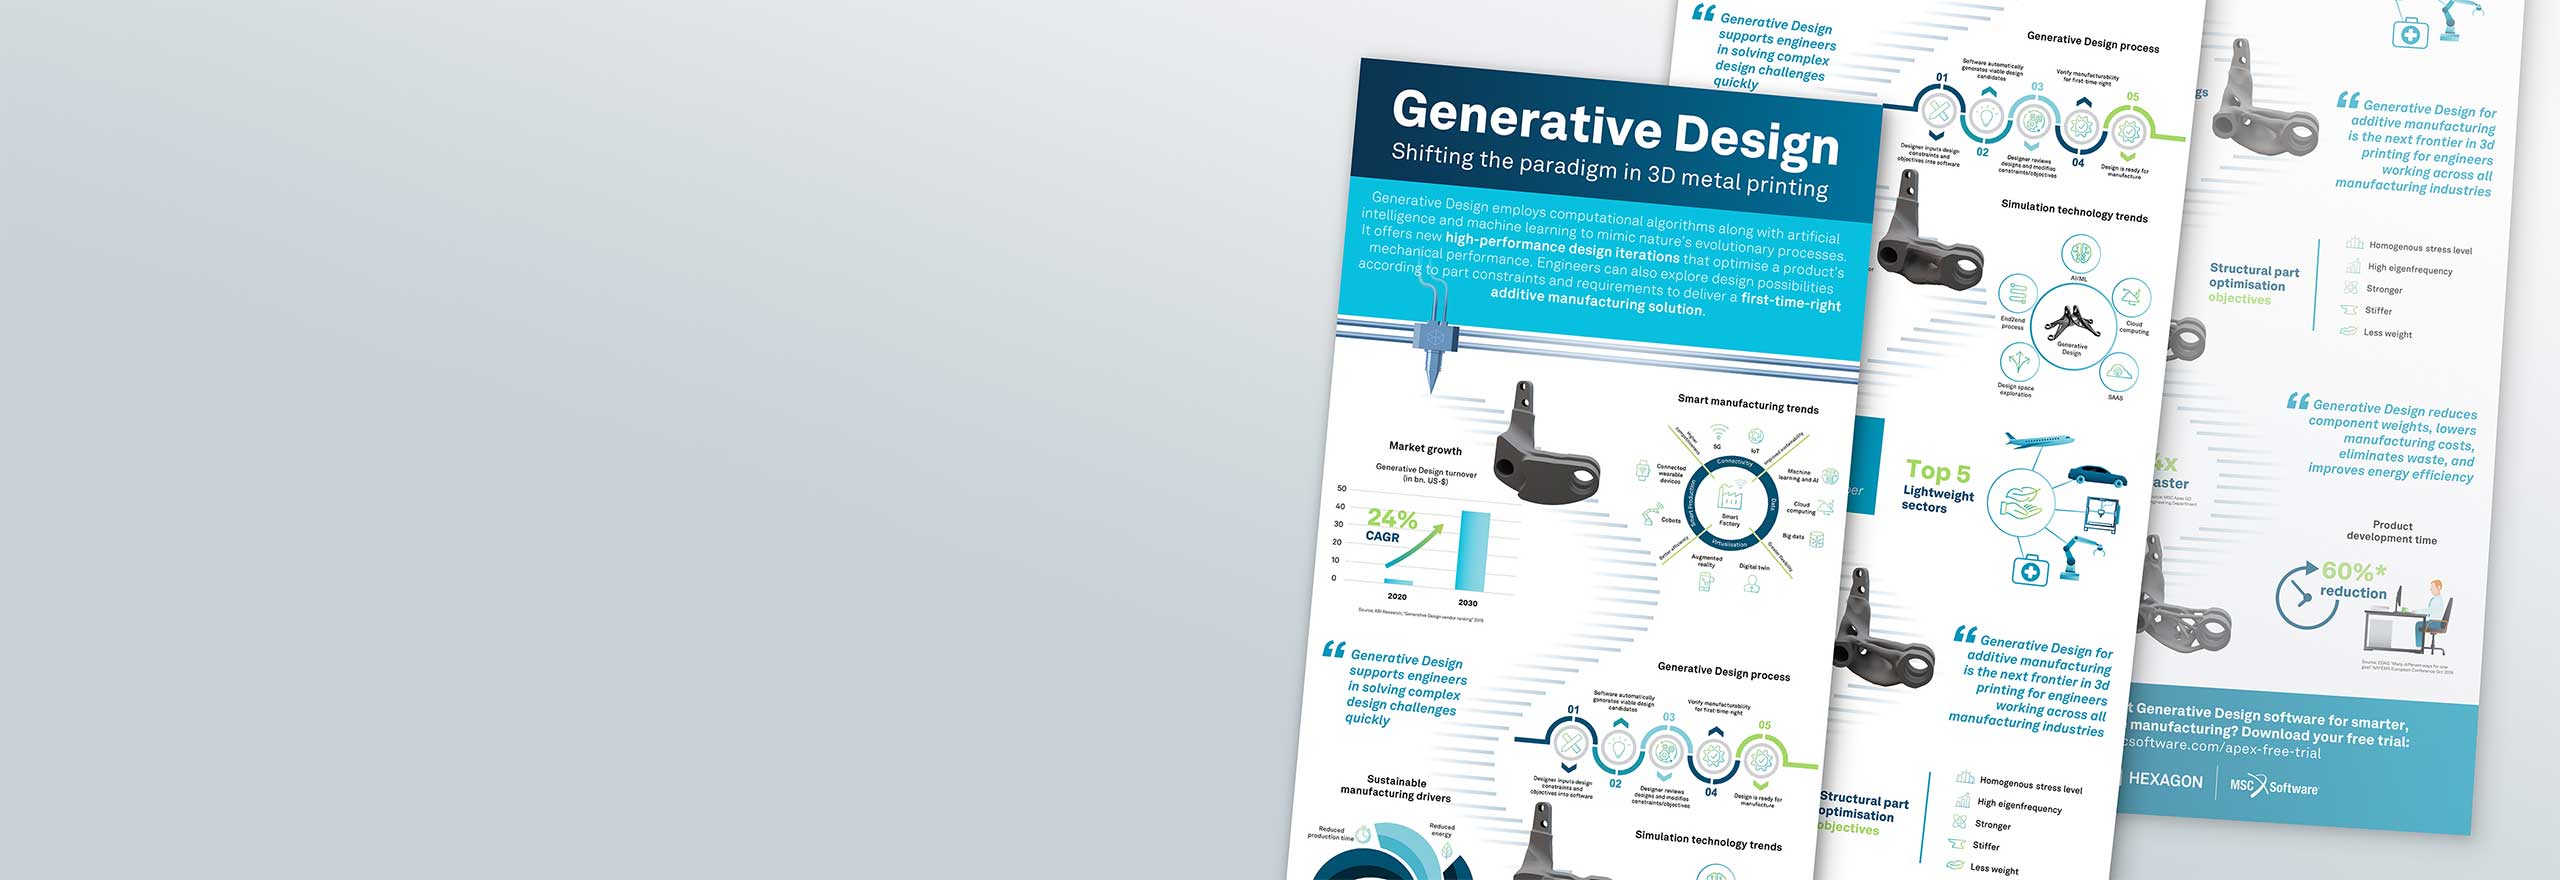 Preview of generative design infographic